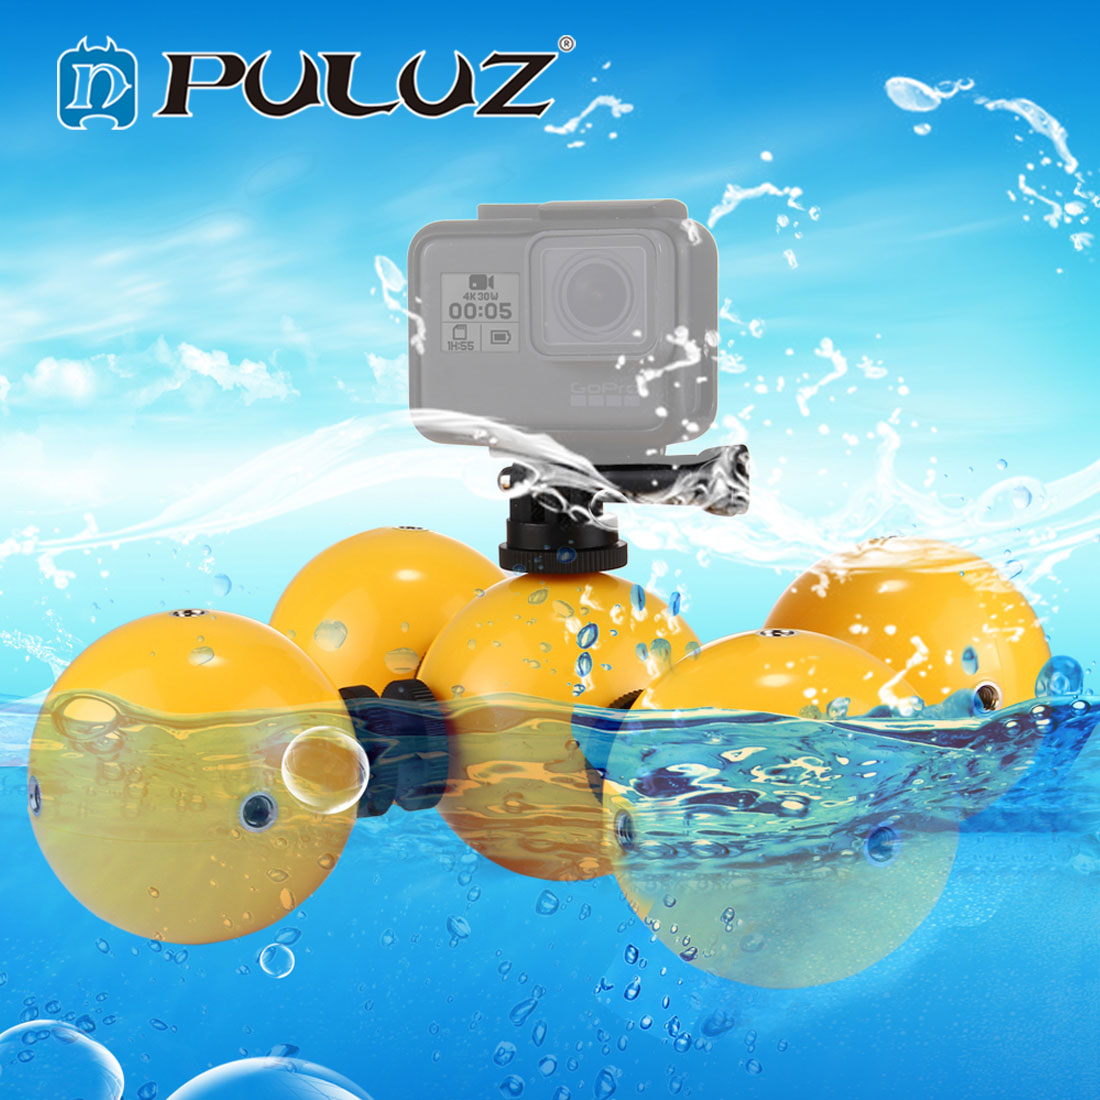 PULUZ 5pcs PULUZ Diving Floaty Bobber Ball Suit GoPro HERO6 /5 /5 Session /4 Session /4 /3+ /3 /2 /1, Xiaoyi and Other Action Cameras for Summer Swimming Skiing Surfing